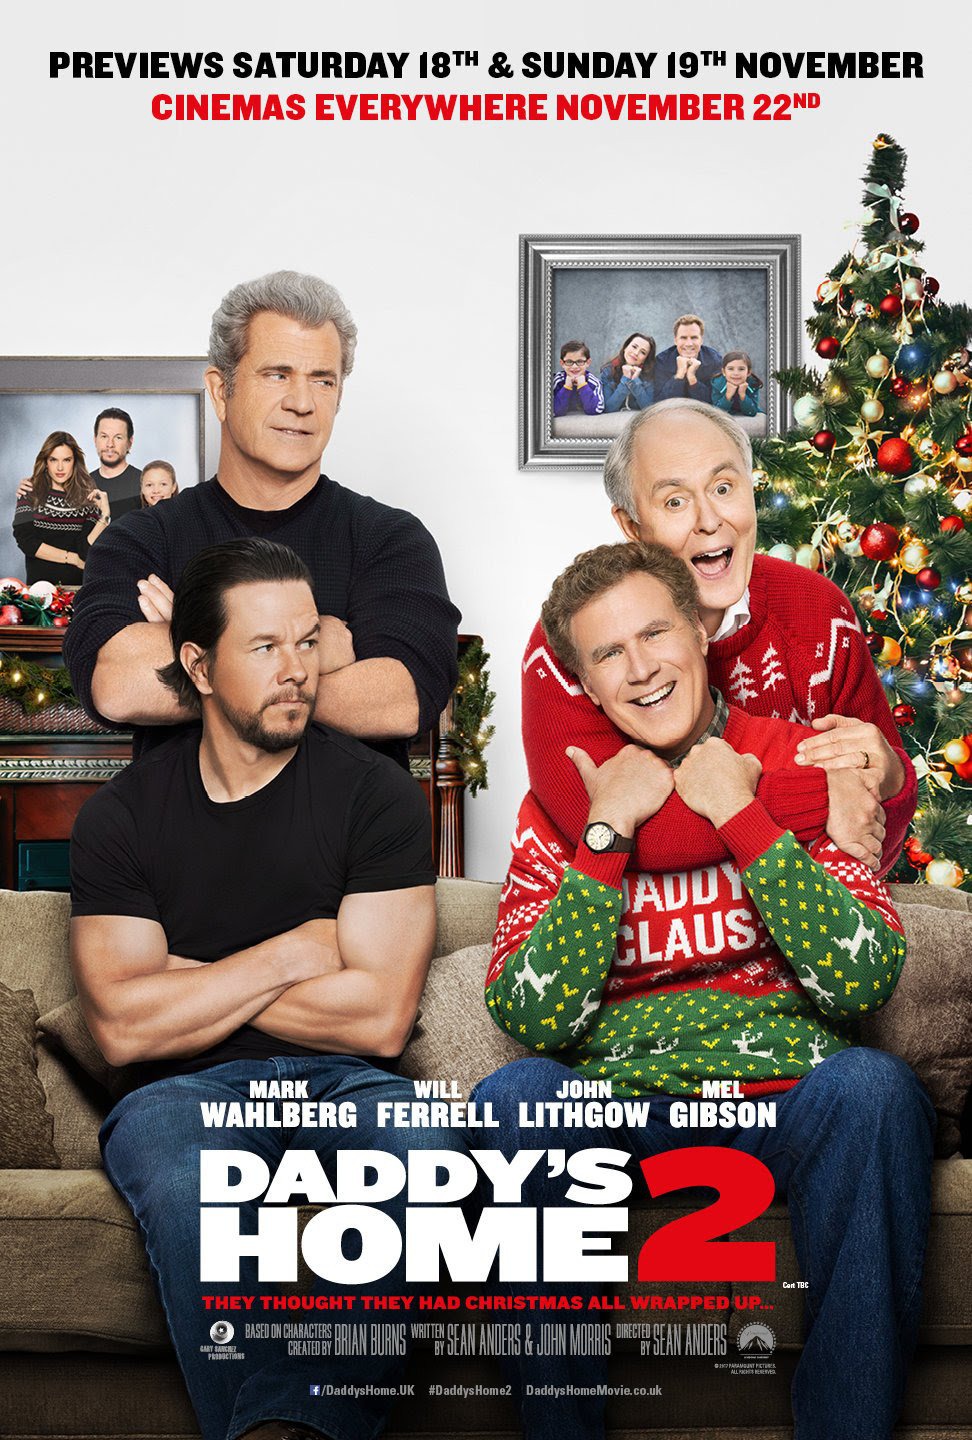 Daddy's Home Two